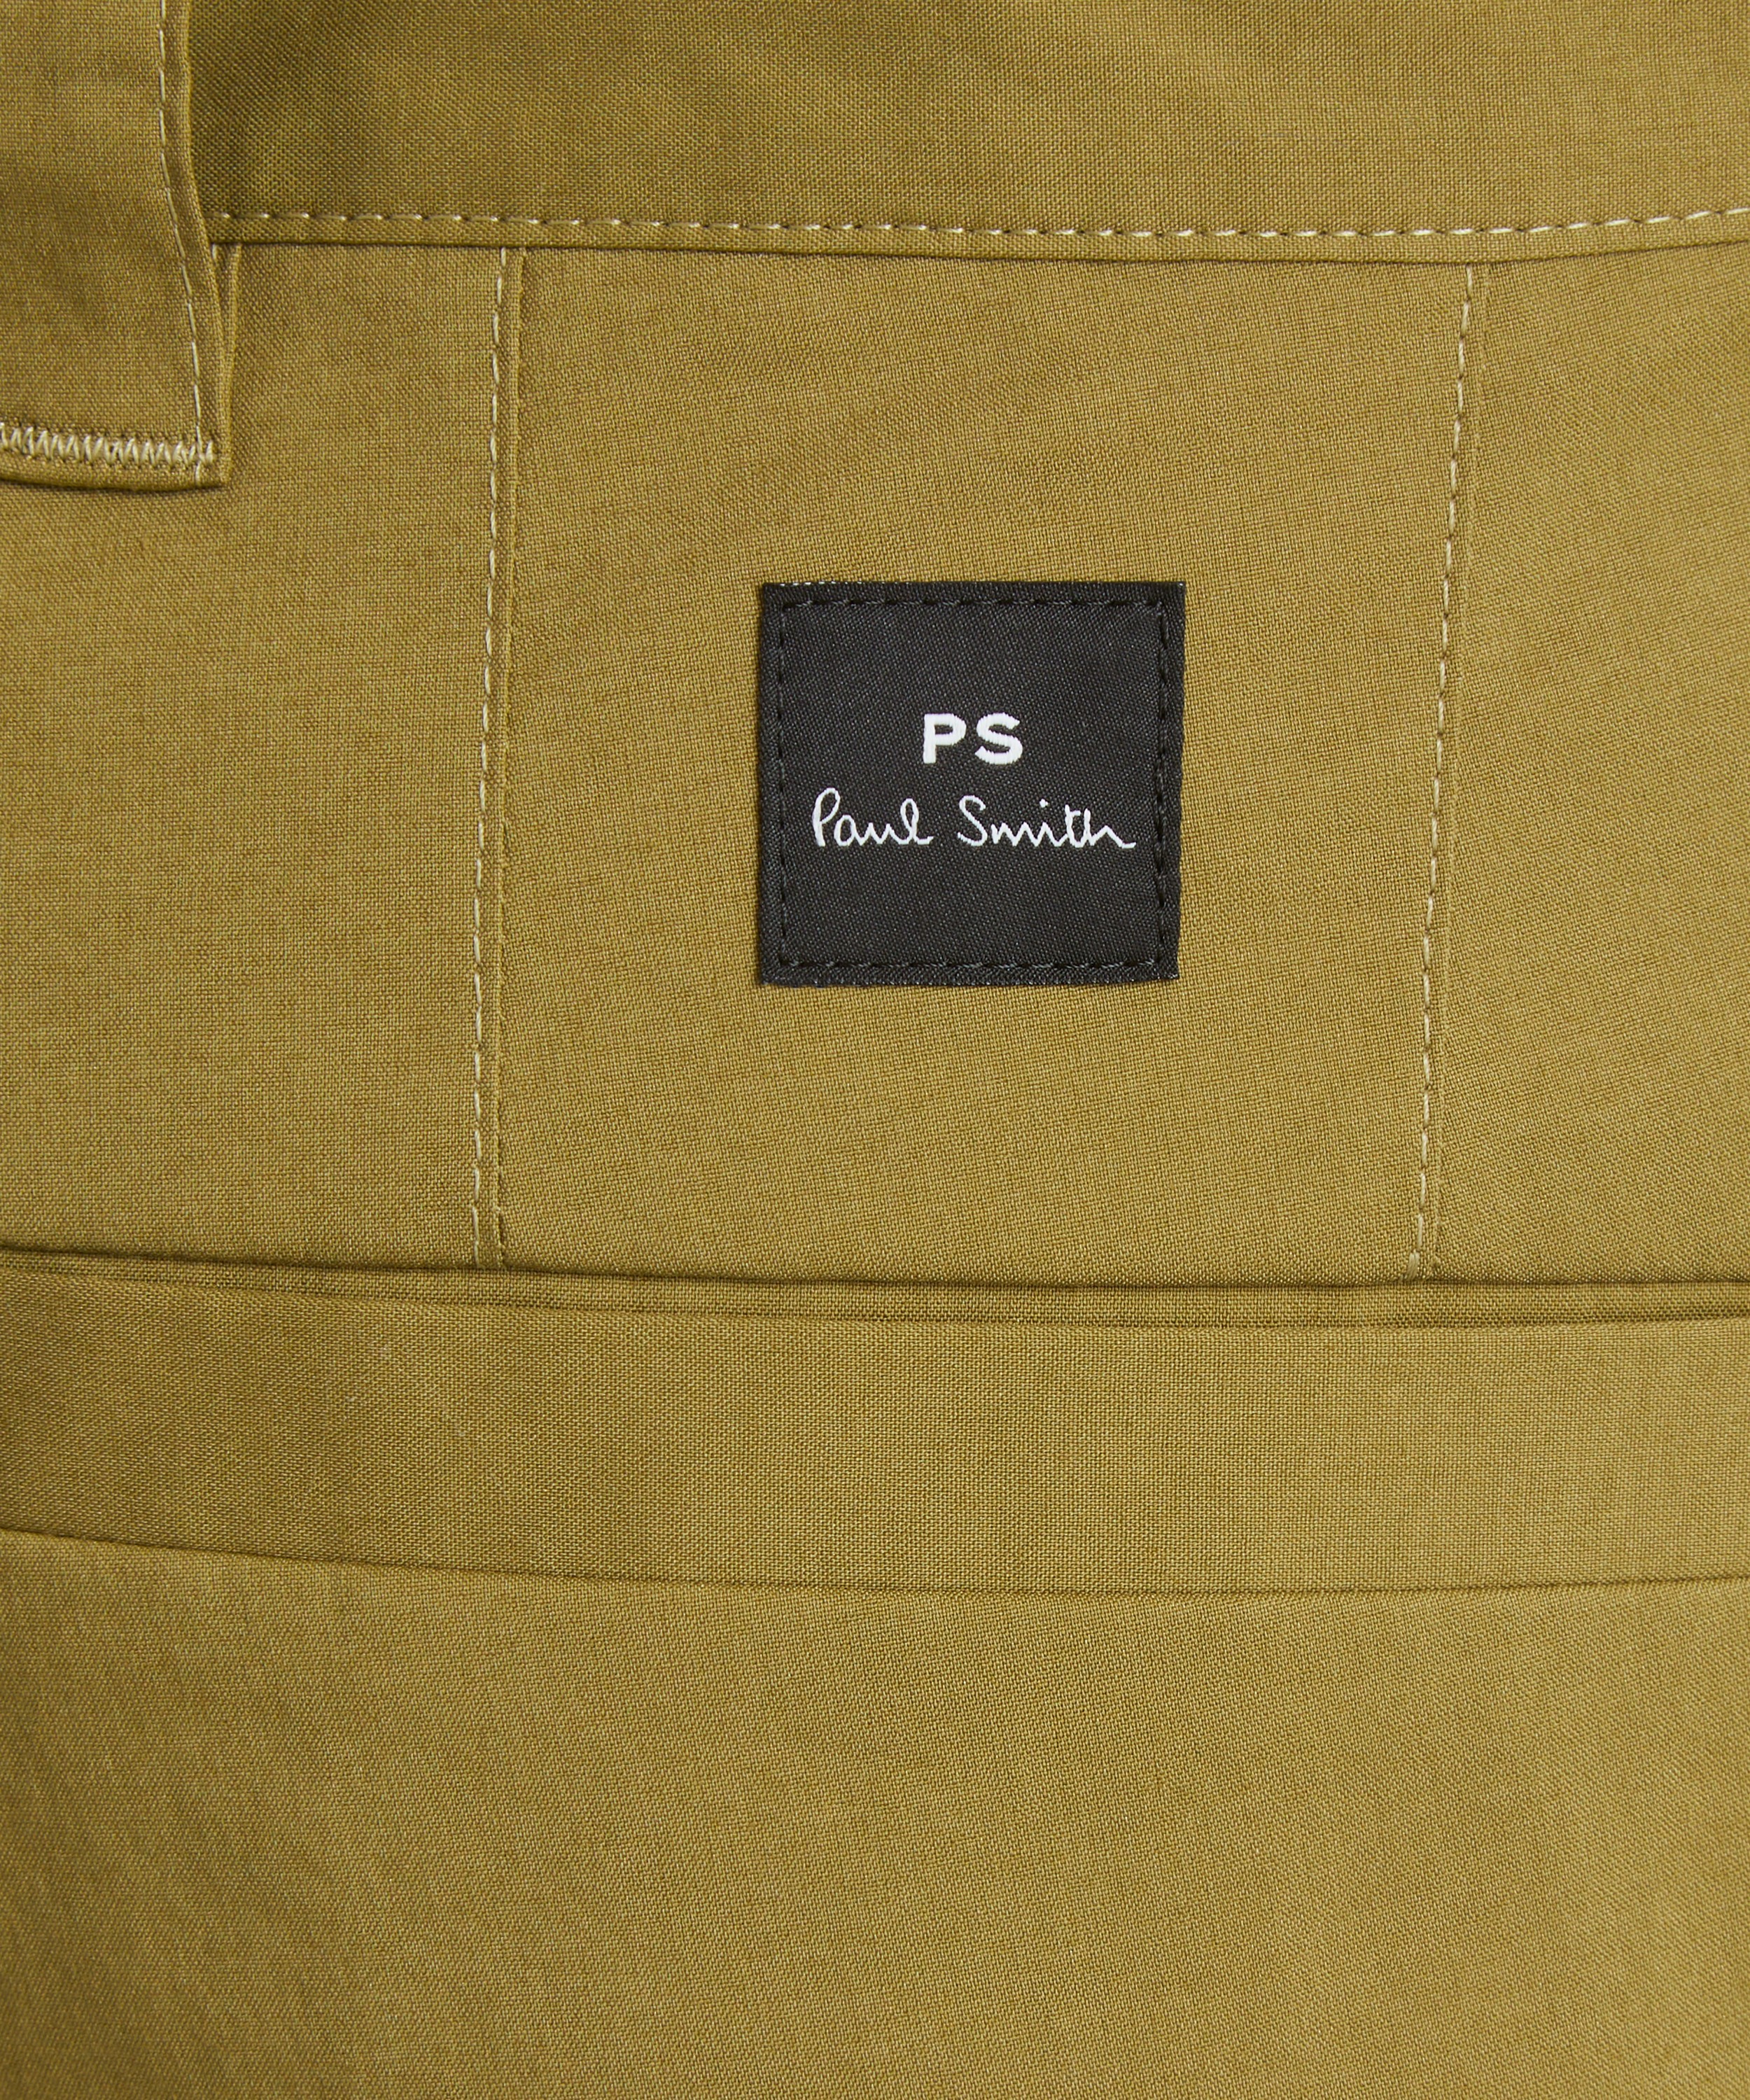 PS Paul Smith - Cotton Poplin Cargo Shorts image number 4